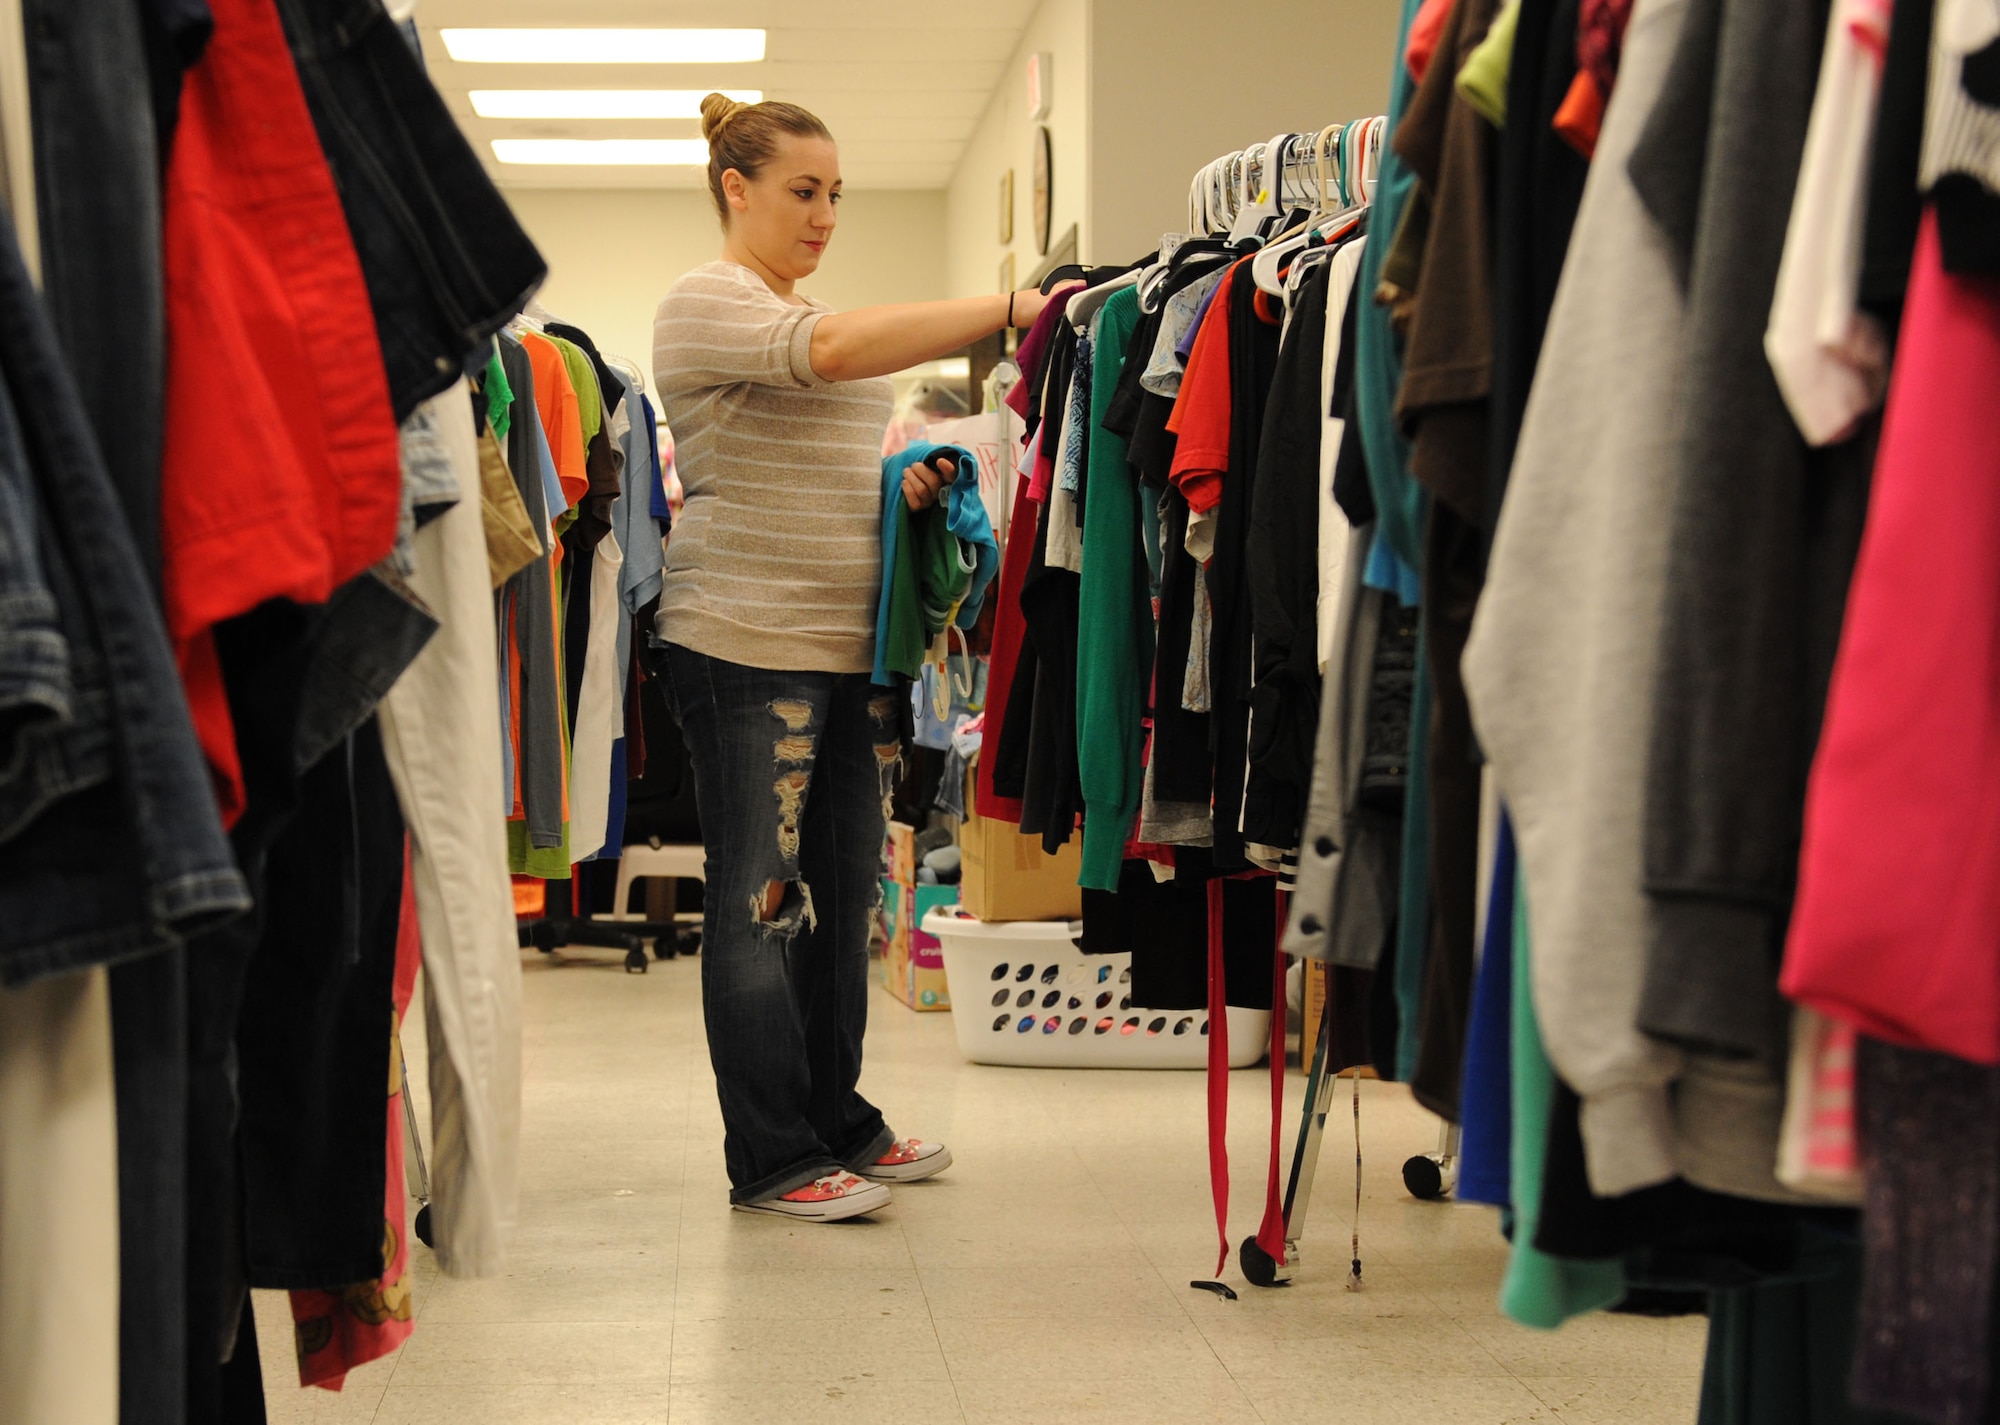 Brittany Alton, spouse of U.S. Marine Corps Sgt. Stephen Alton, Keesler Marine Detachment instructor, sorts through clothing items at the Airman’s Attic Aug. 12, 2016, on Keesler Air Force Base, Miss. The Airman’s Attic assists enlisted members in pay grades E-1 through E-6 with obtaining basic household items at no cost. It is located at the corner of Meadows Drive and 1st Street, next to the Keesler Thrift Shop. (U.S. Air Force photo by Kemberly Groue/Released)